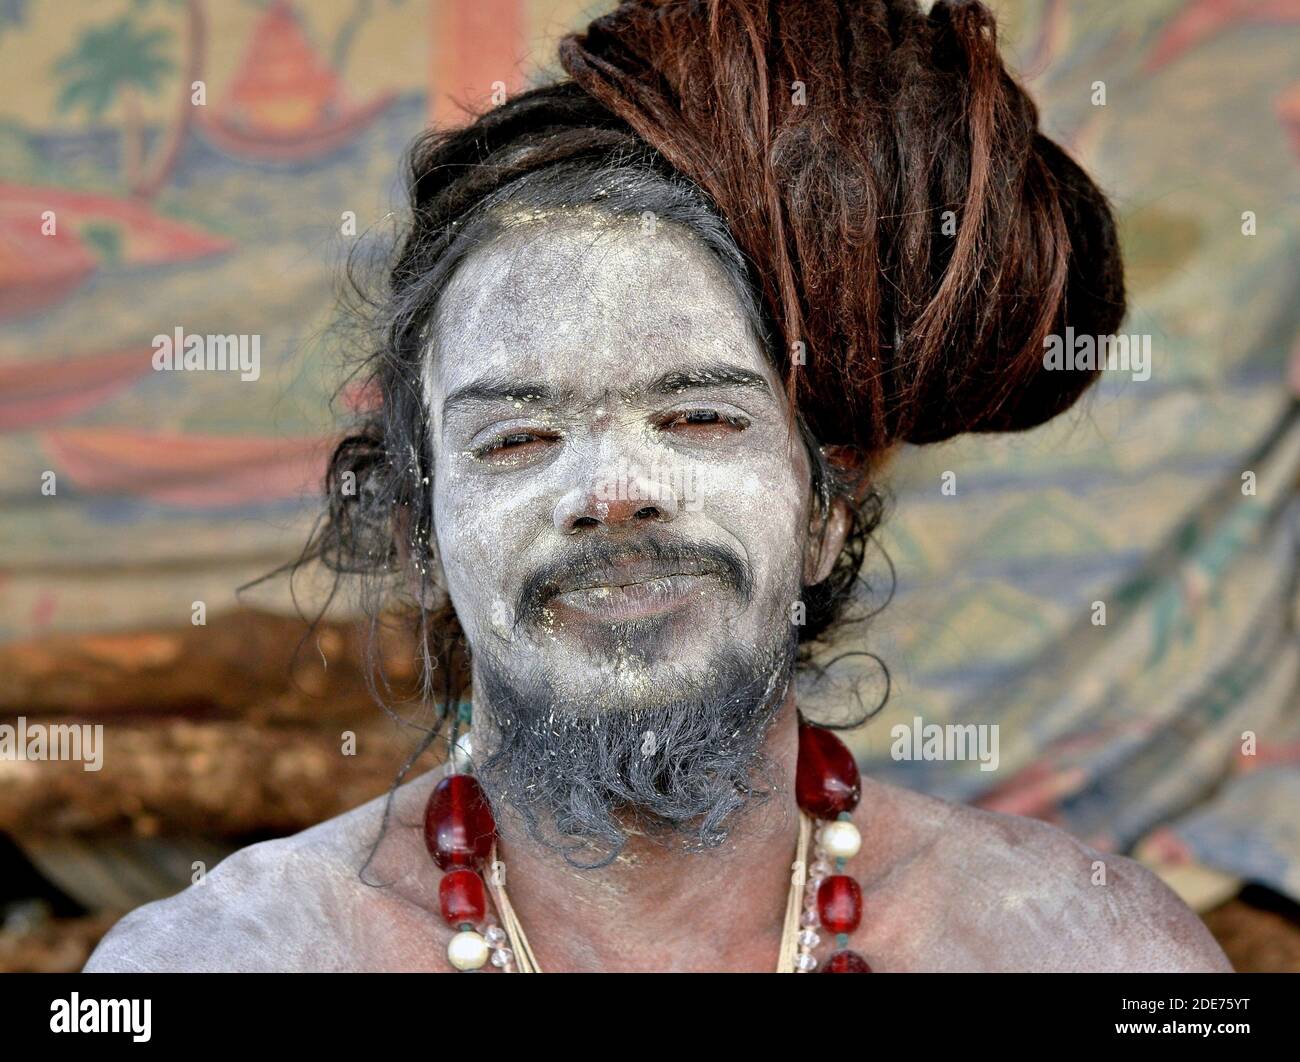 Young Indian Hindu Shaivite sadhu and yogi with dread bun and sacred white ash (vibhuti) all over his face, beard and shoulders poses for the camera. Stock Photo